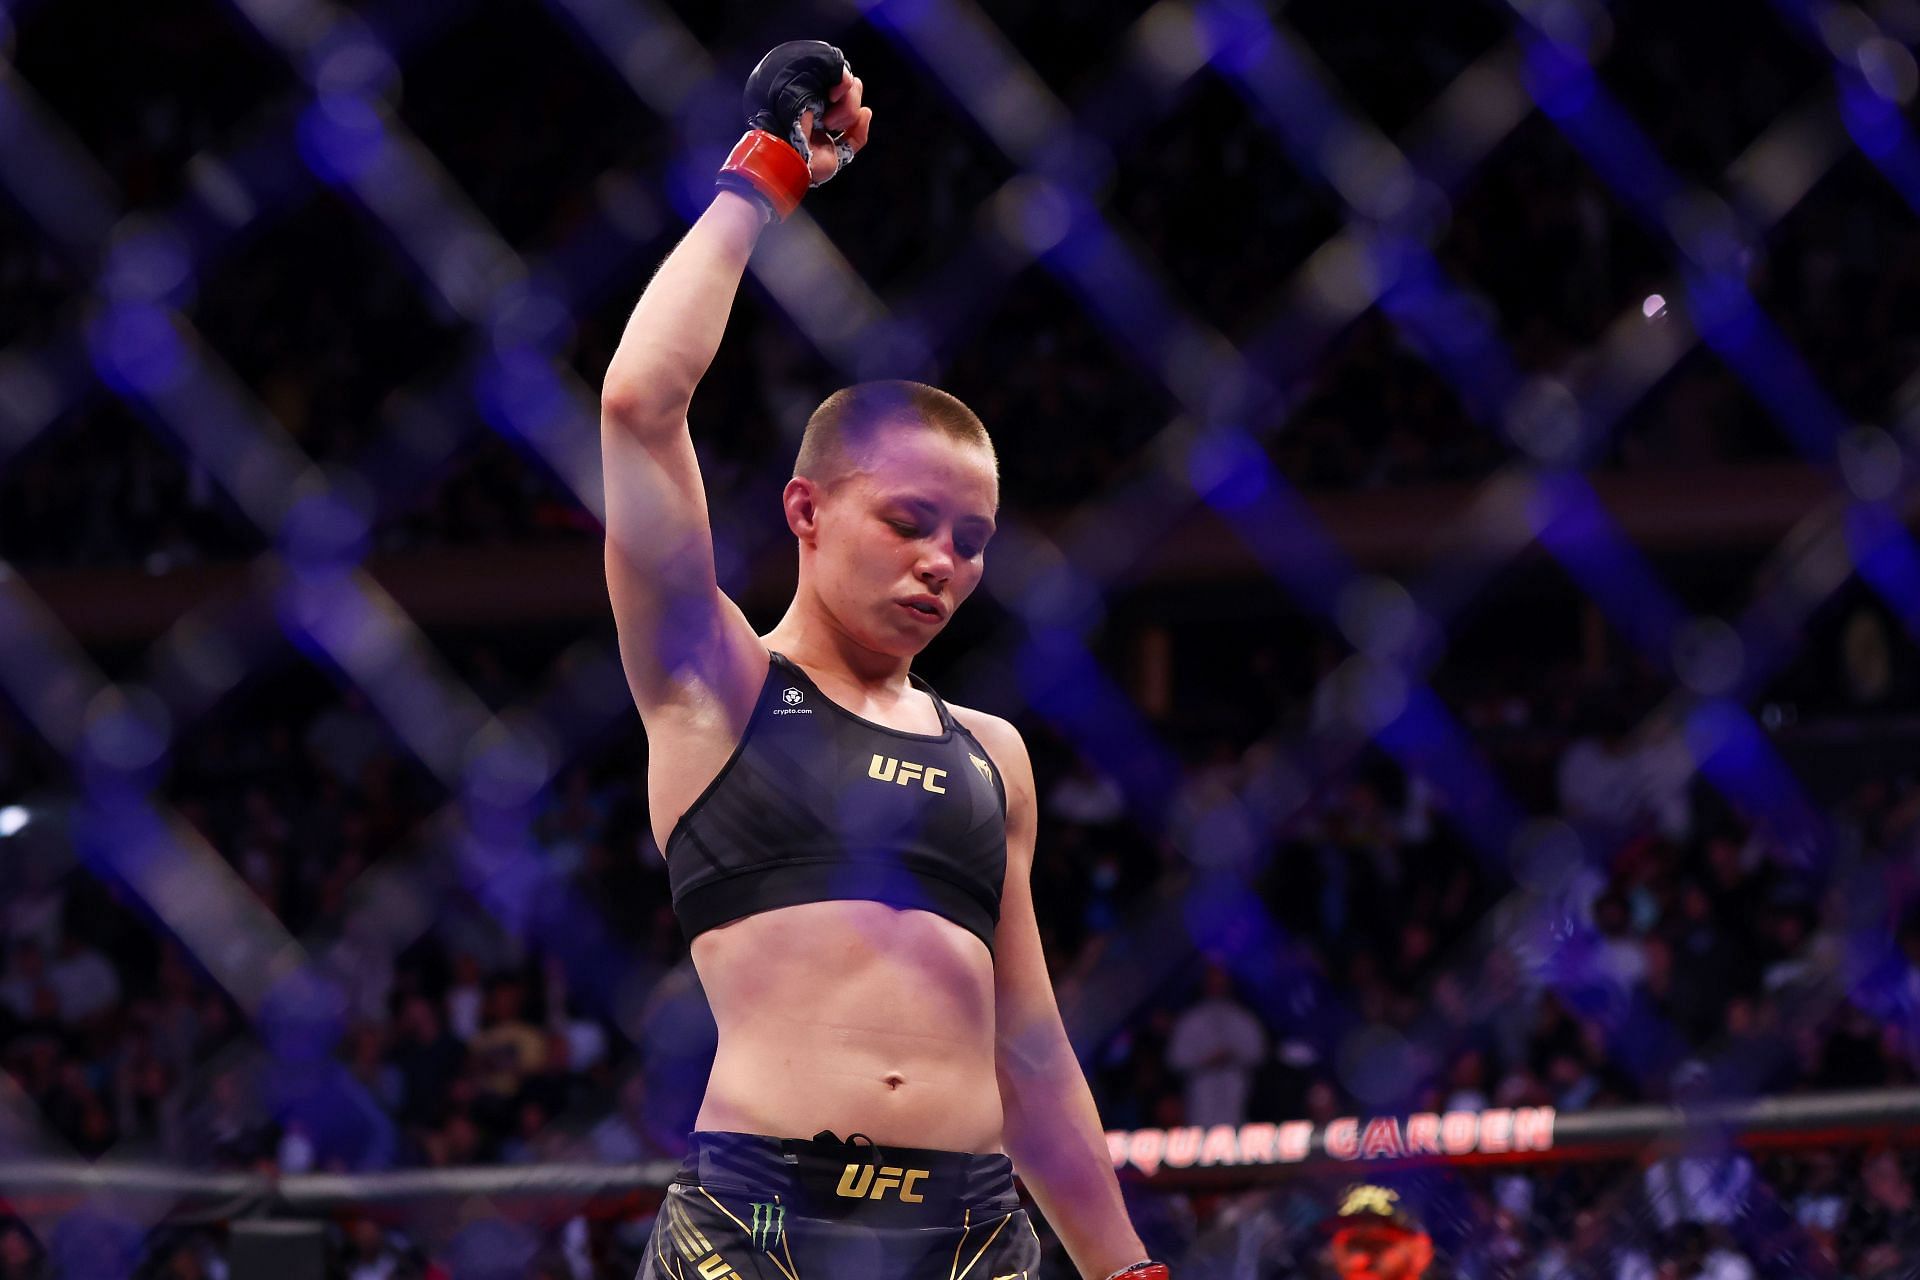 Rose Namajunas became a star thanks to her two wins over Joanna Jedrzecjzyk